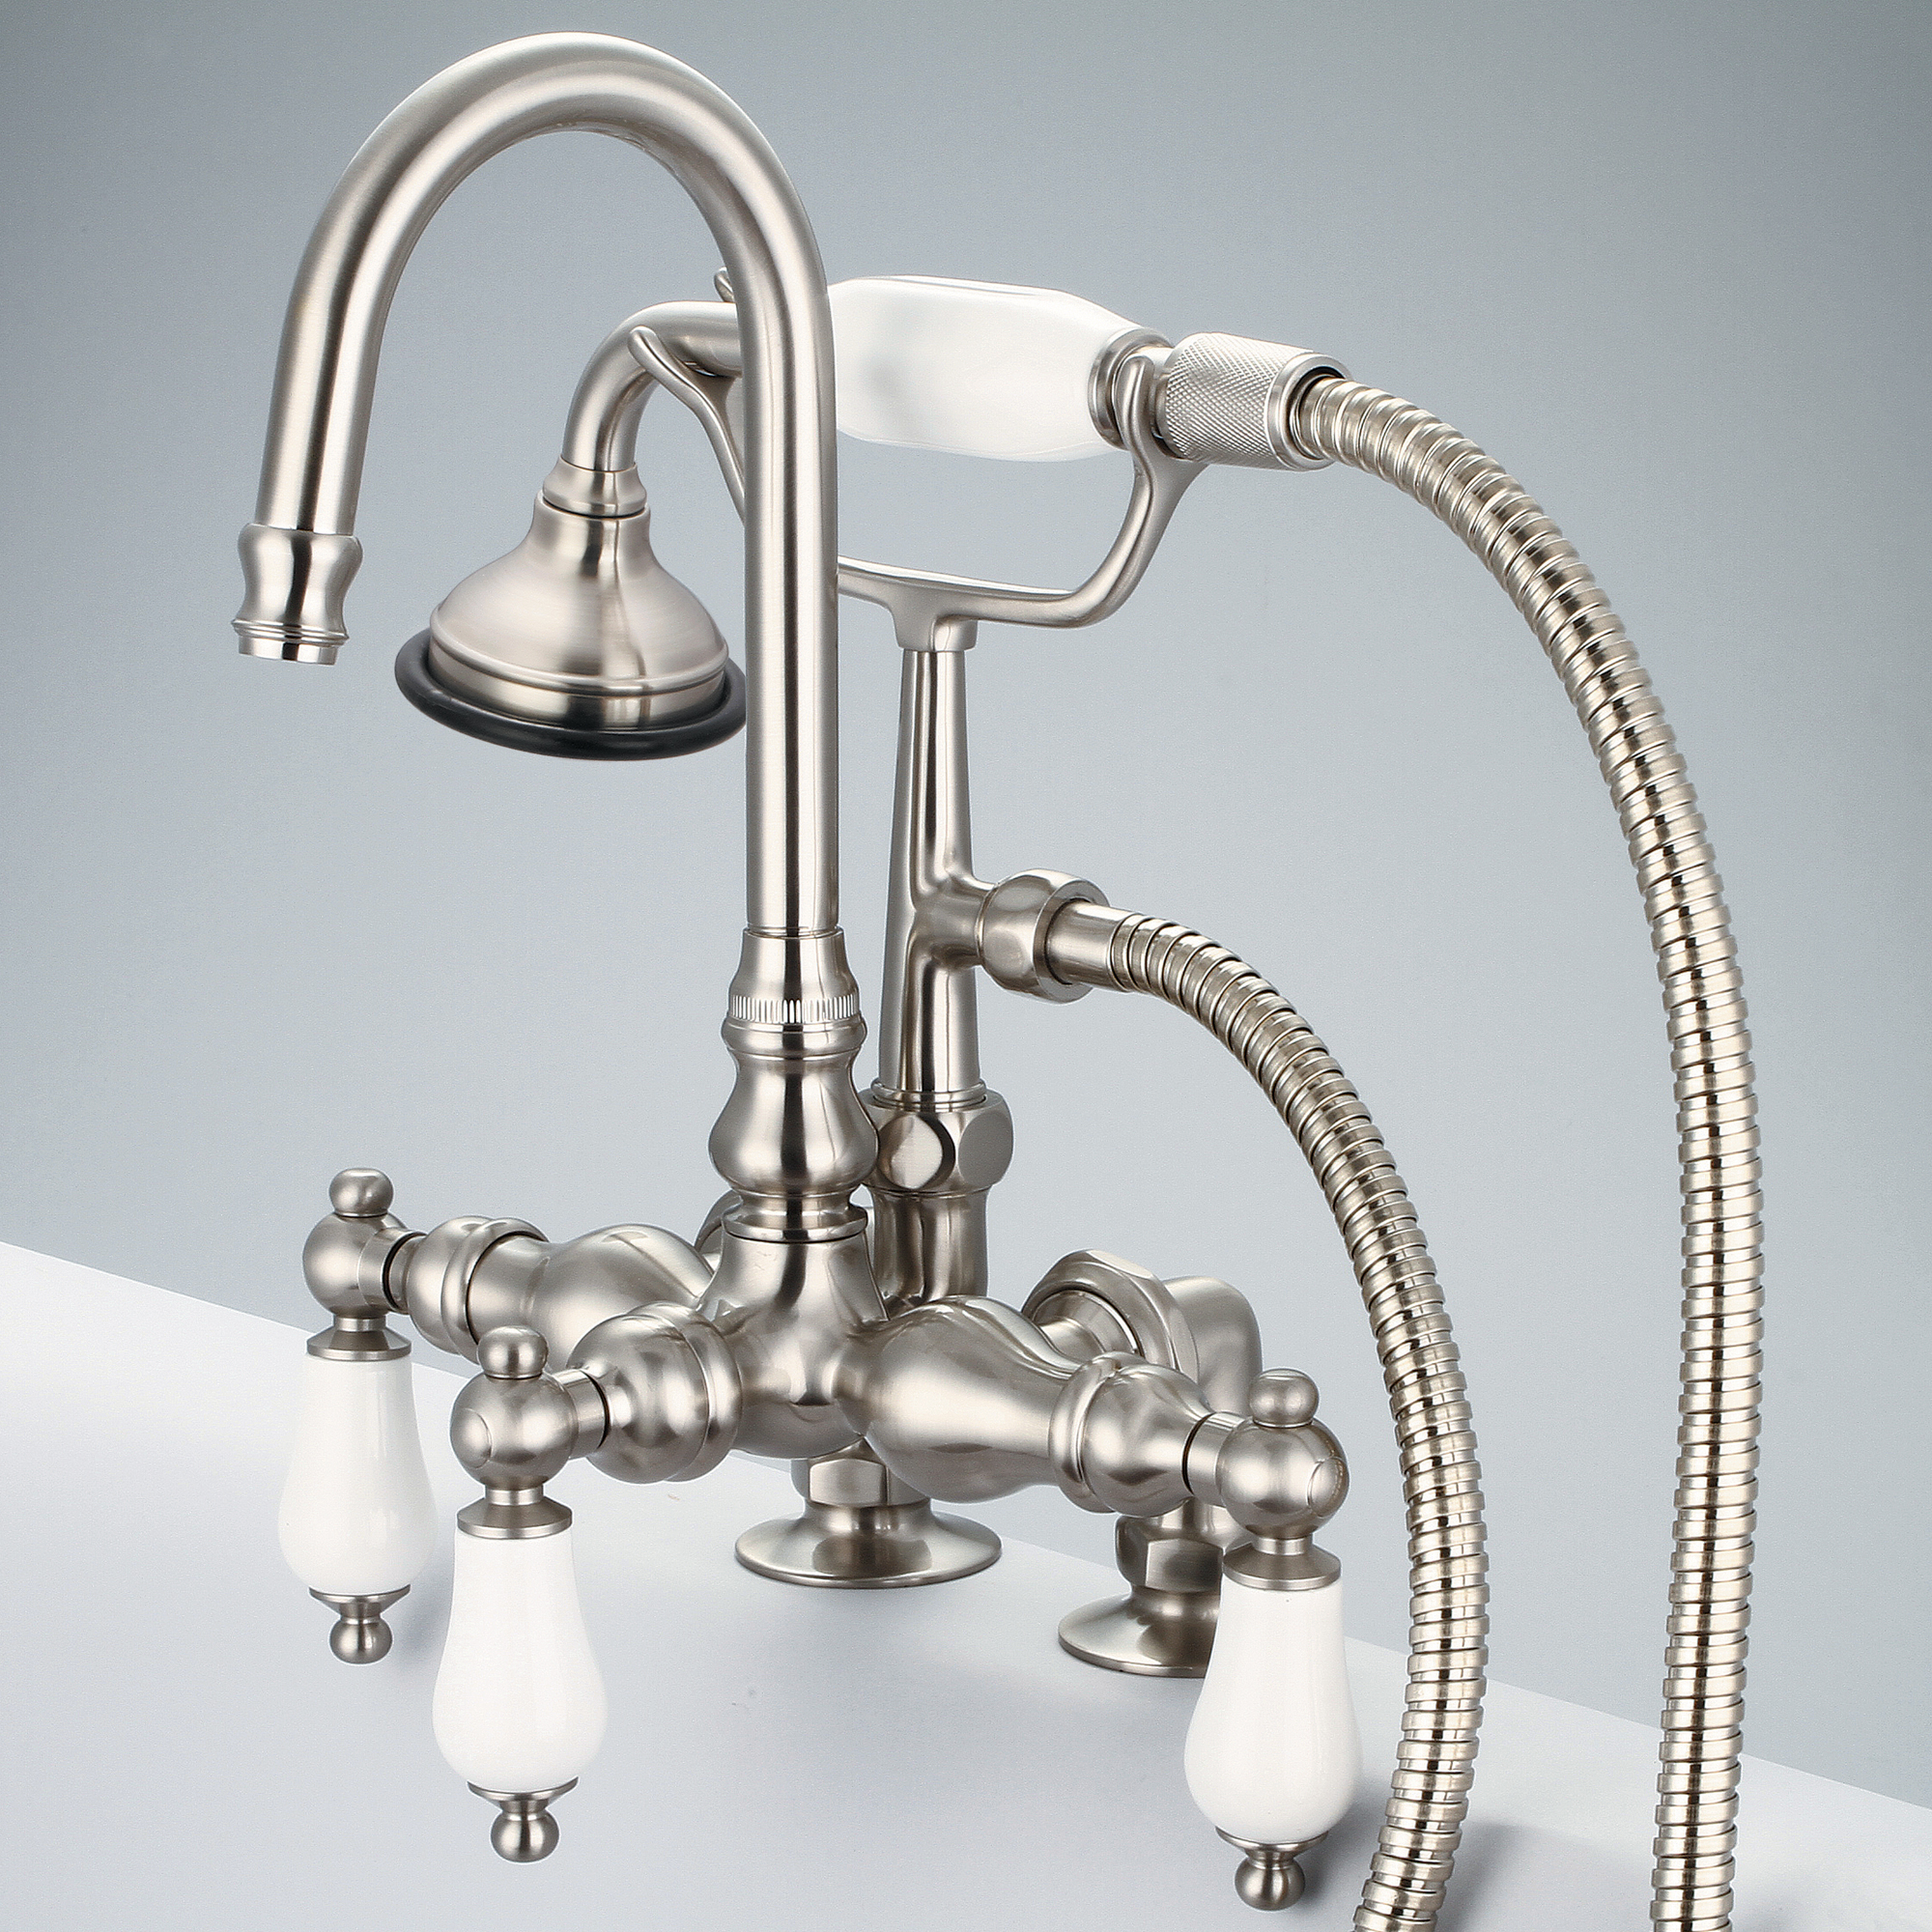 Vintage Classic 3.375 Inch Center Deck Mount Tub Faucet With Gooseneck Spout, 2 Inch Risers & Handheld Shower in Brushed Nickel Finish With Metal Lever Handles Without Labels